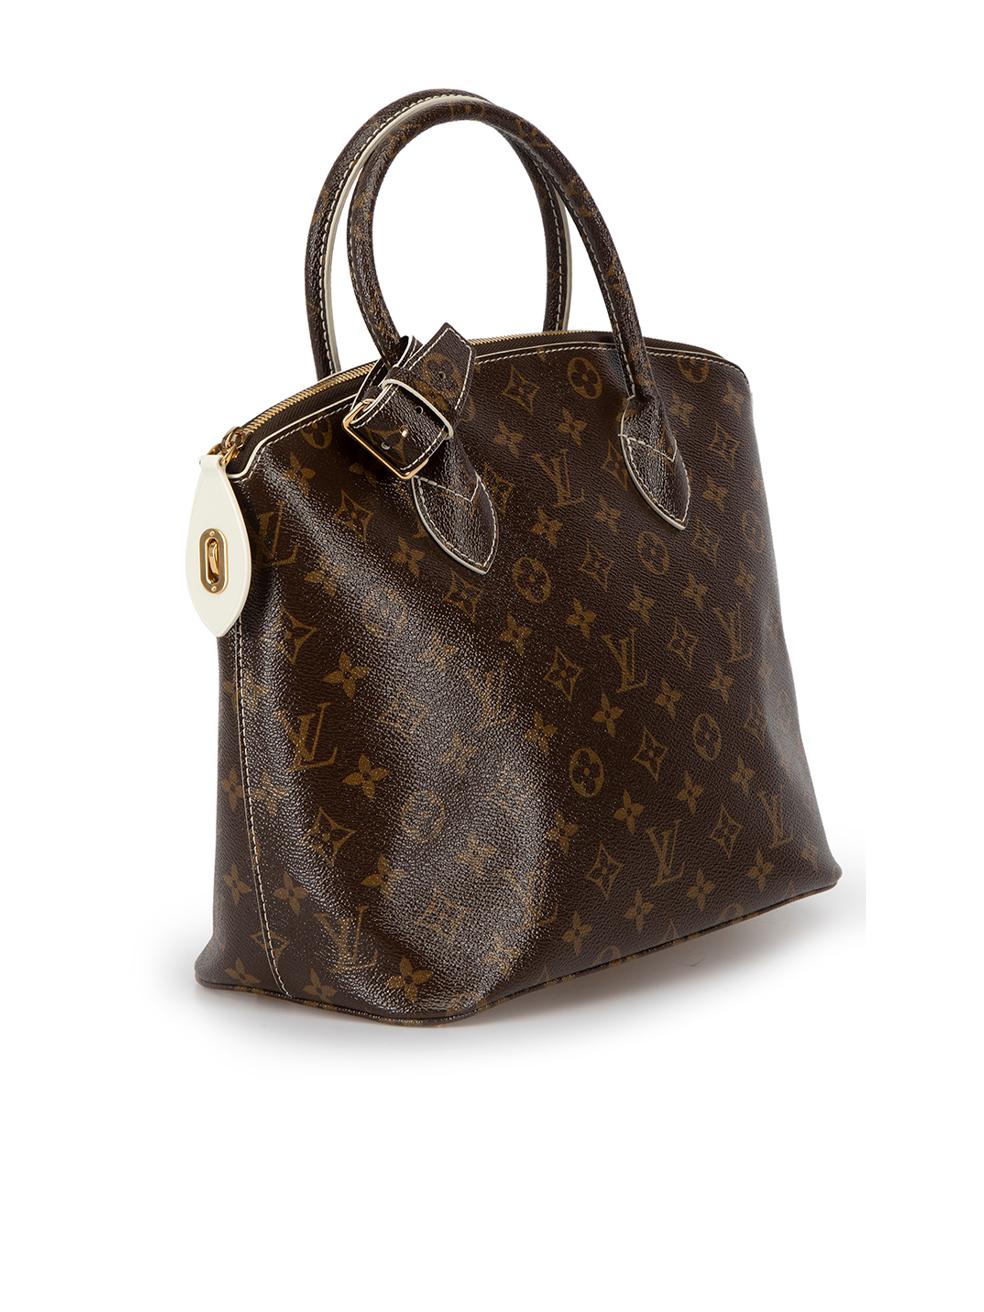 CONDITION is Never Worn. No visible wear to bag is evident on this used Louis Vuitton designer resale item. This item comes with original dust bag.



Details


2011

Brown

Coated canvas

Medium top handle bag

Signature LV monogram pattern

2x